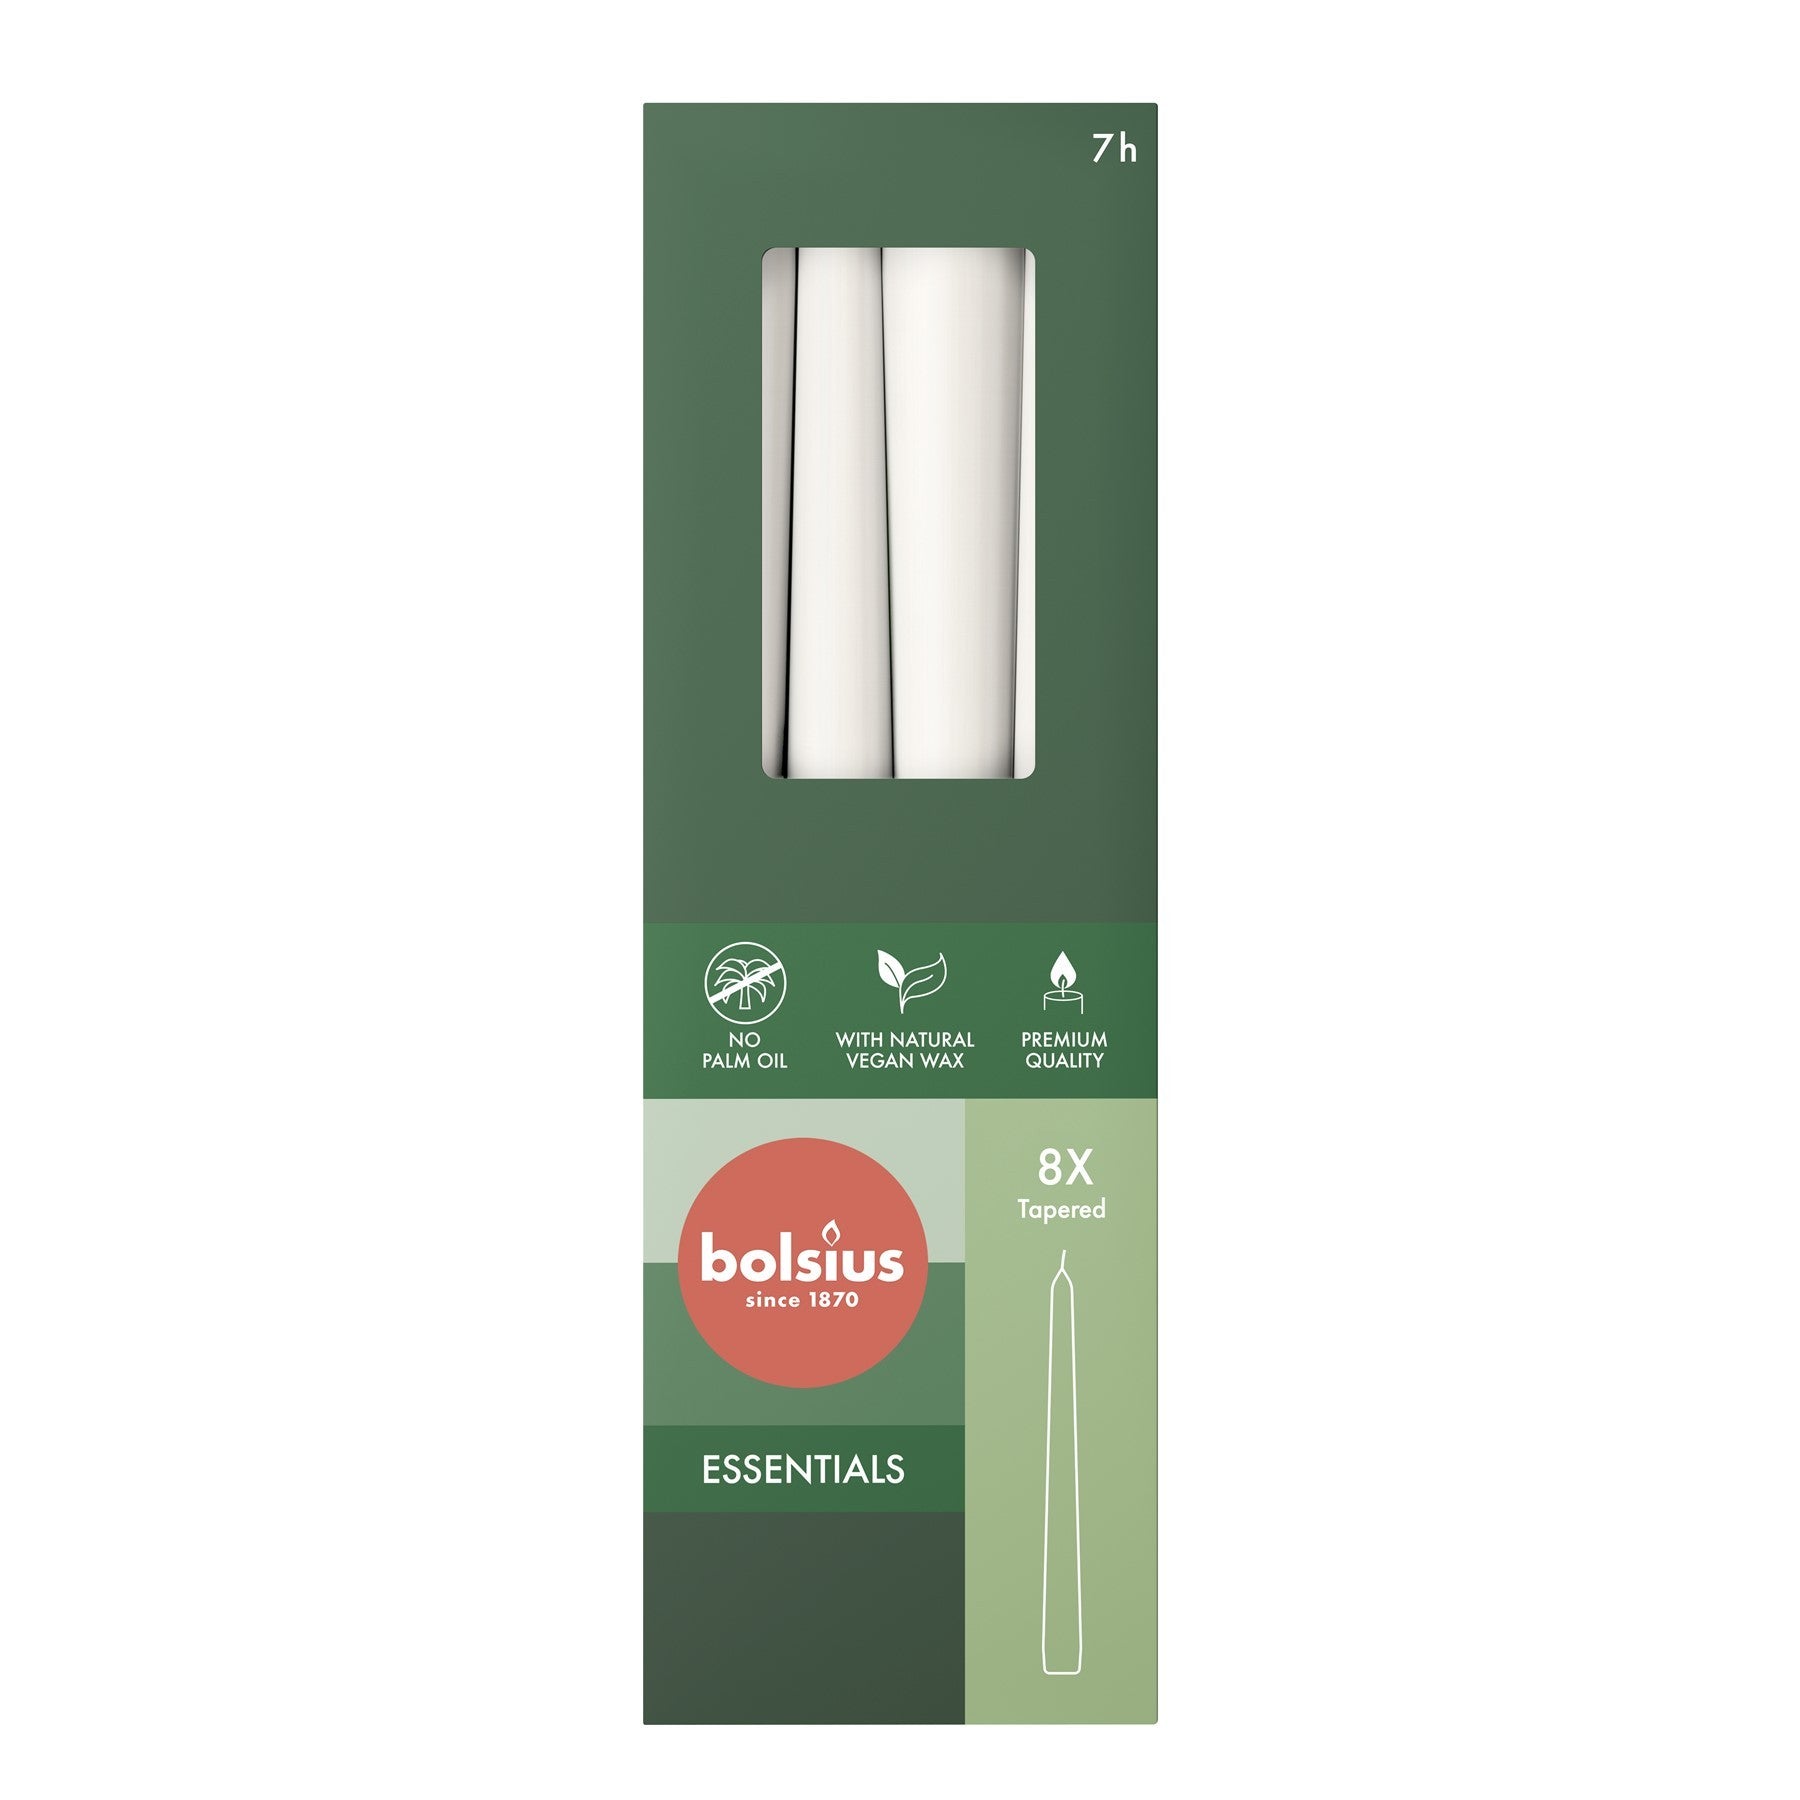 View Bolsius Cloudy White Box of 8 Tapered Candles 245mm x 24mm information